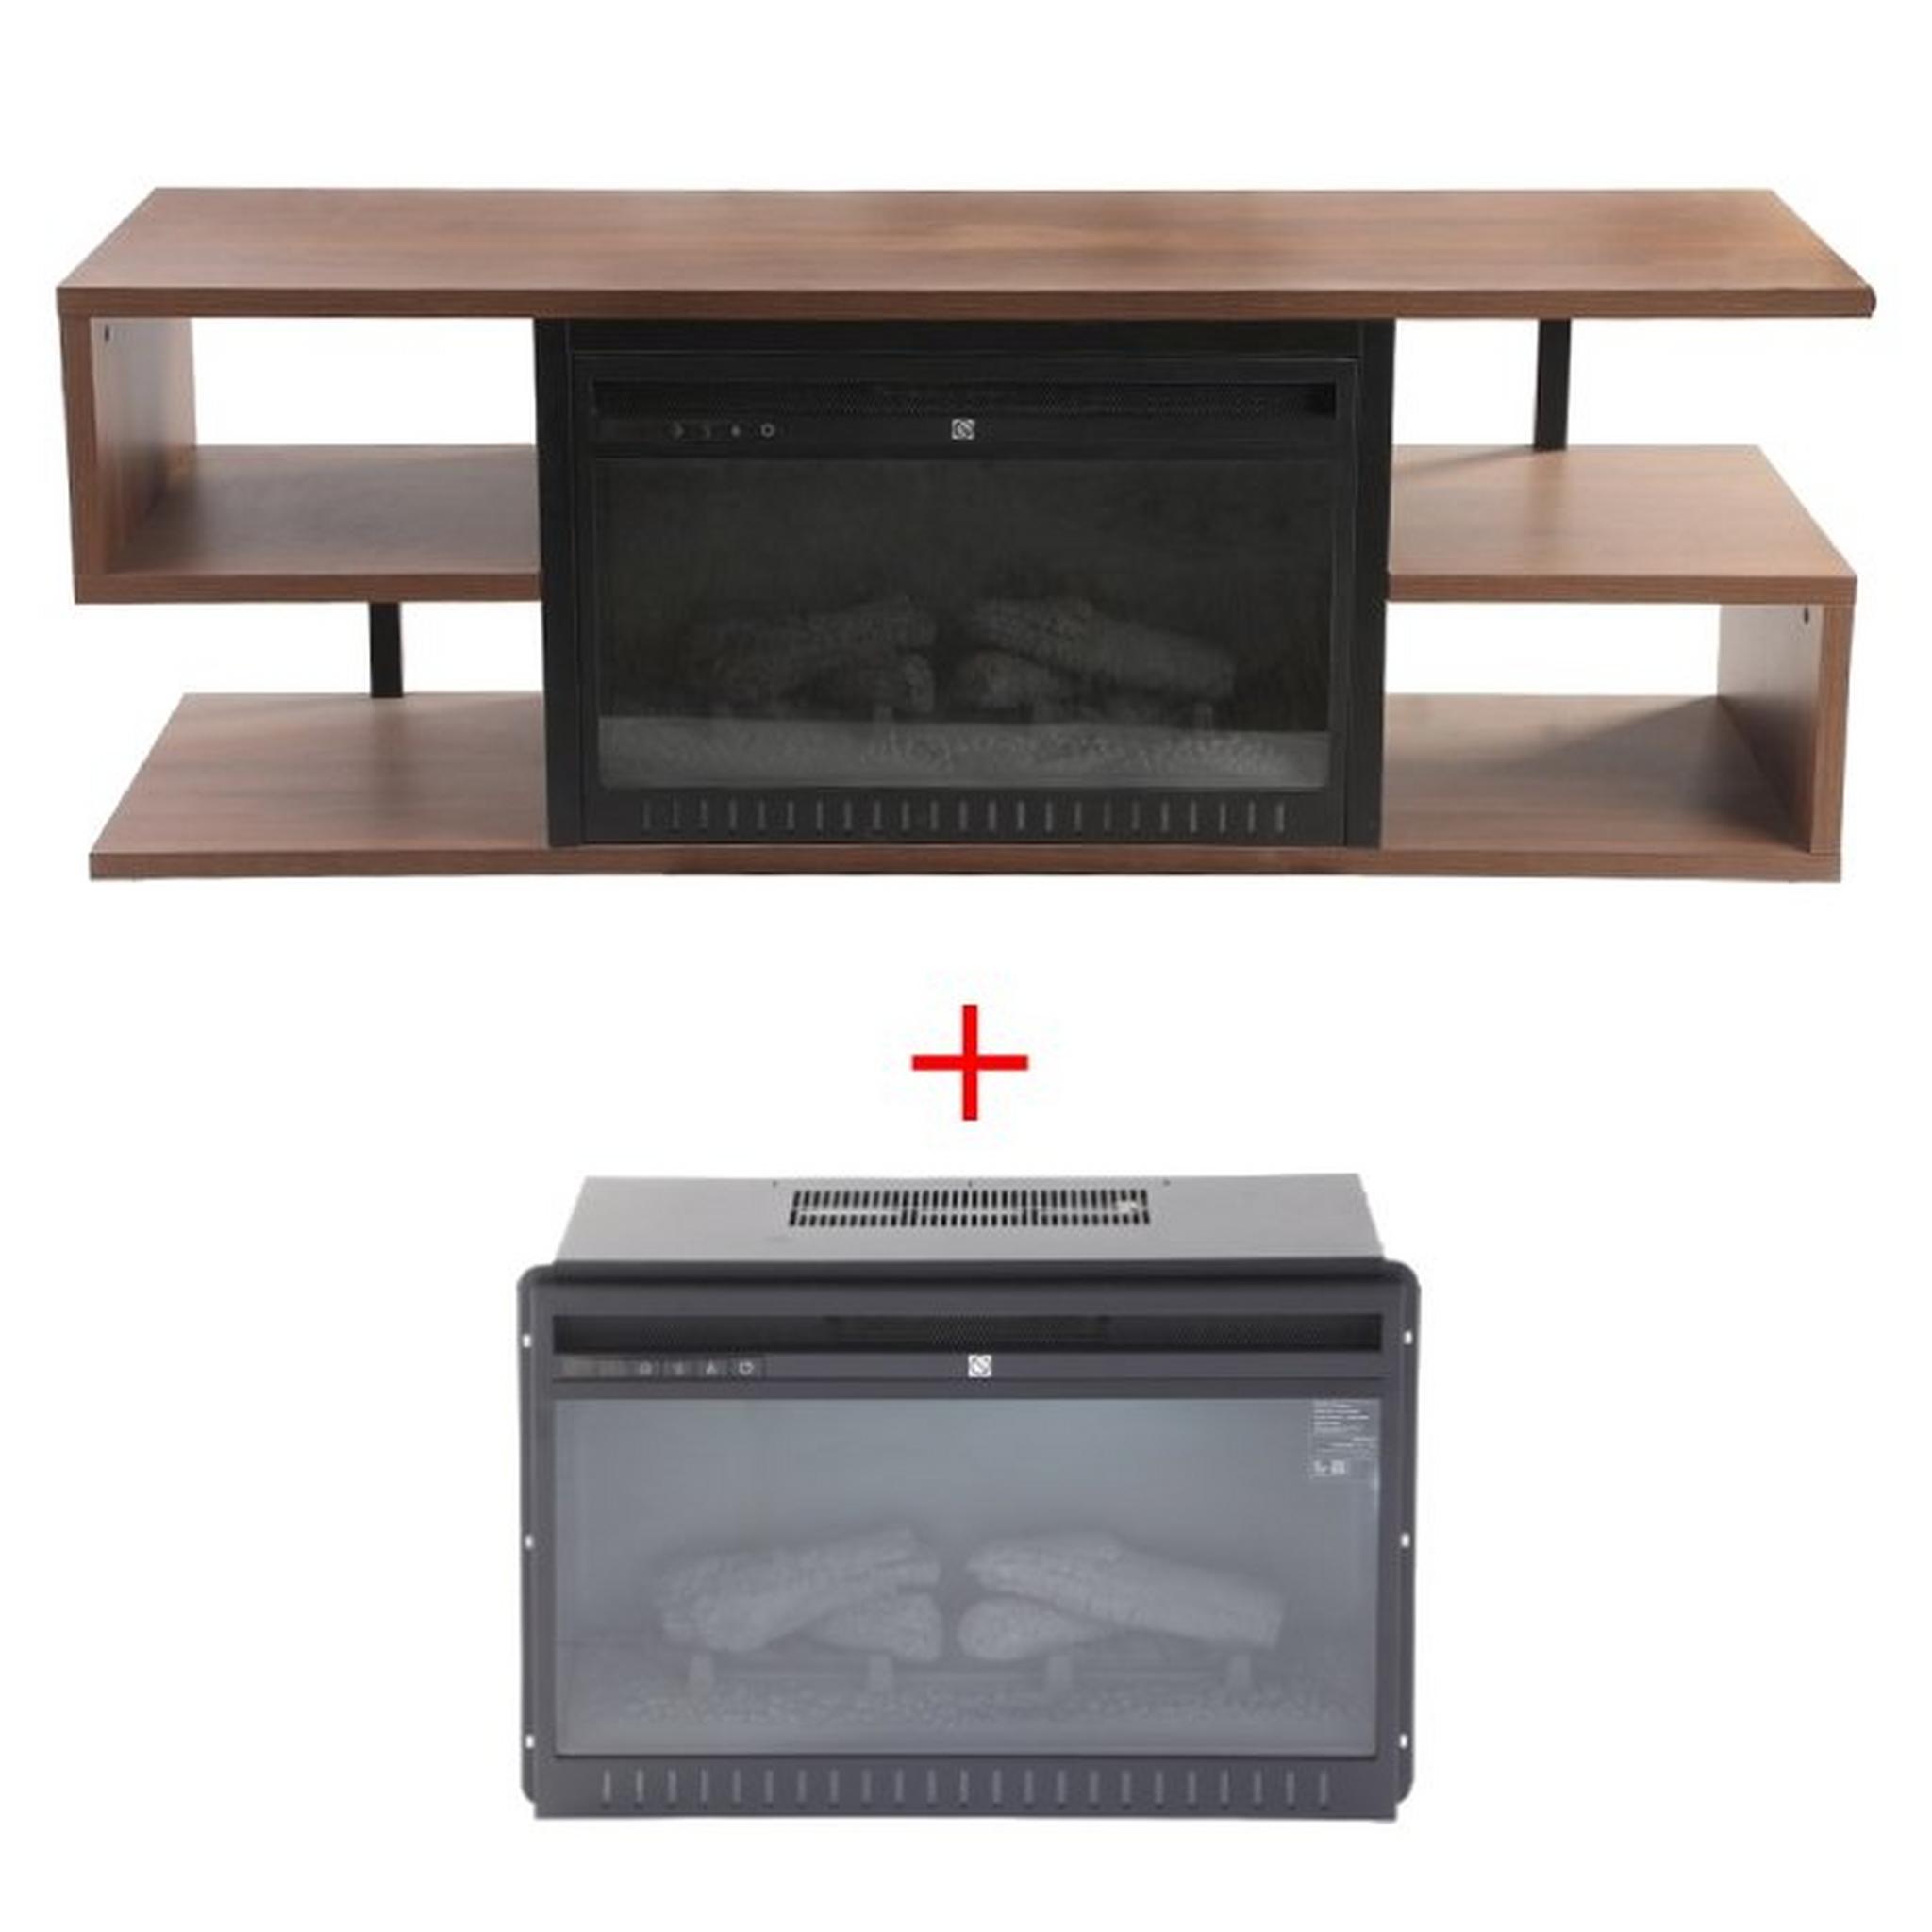 Wansa Upto 55-inch TV Stand with Fireplace Insert (A510-8) + Fireplace insert for TV Stand (SF122-26A)